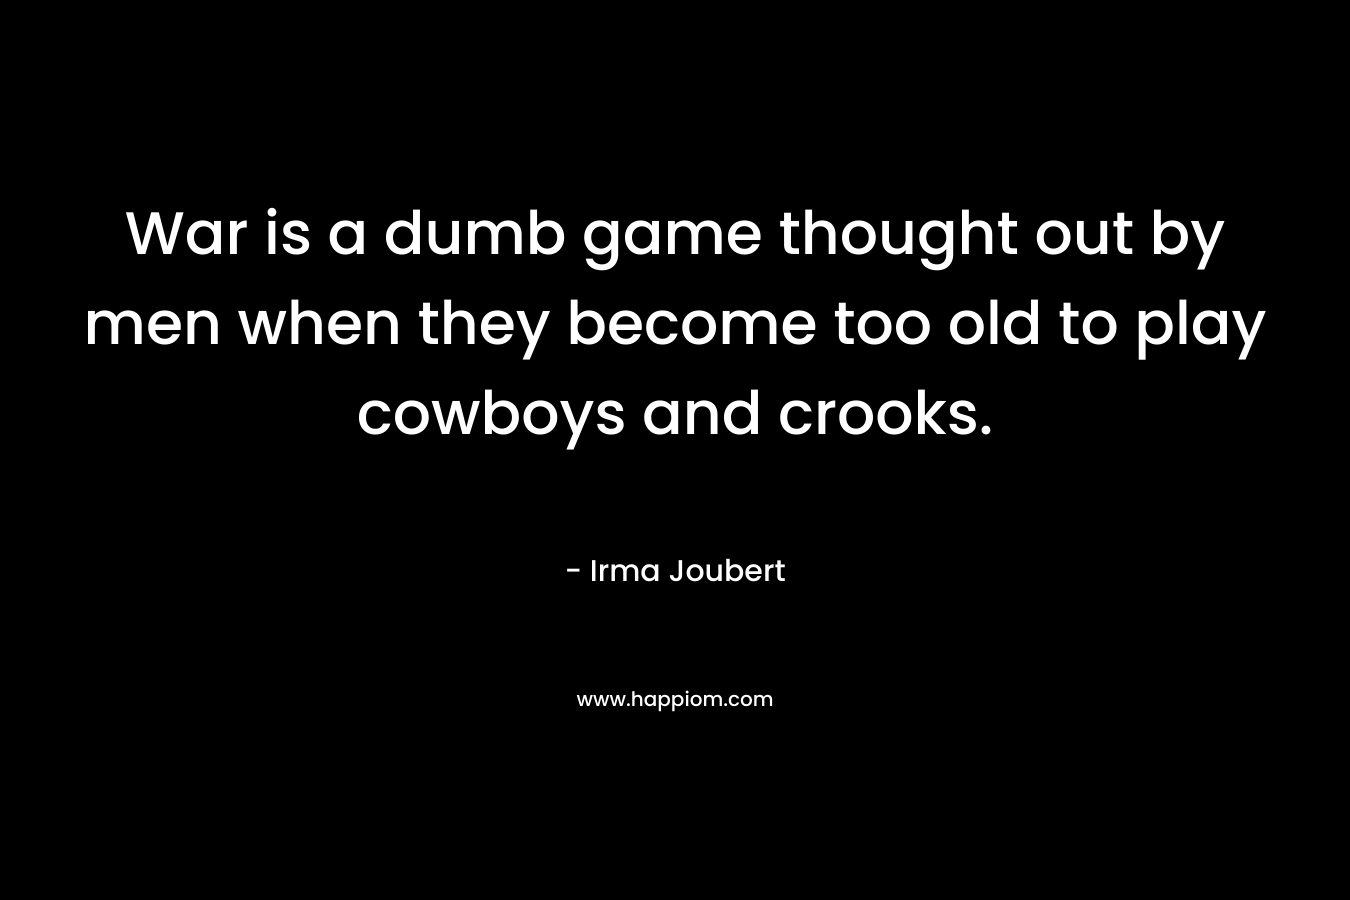 War is a dumb game thought out by men when they become too old to play cowboys and crooks.